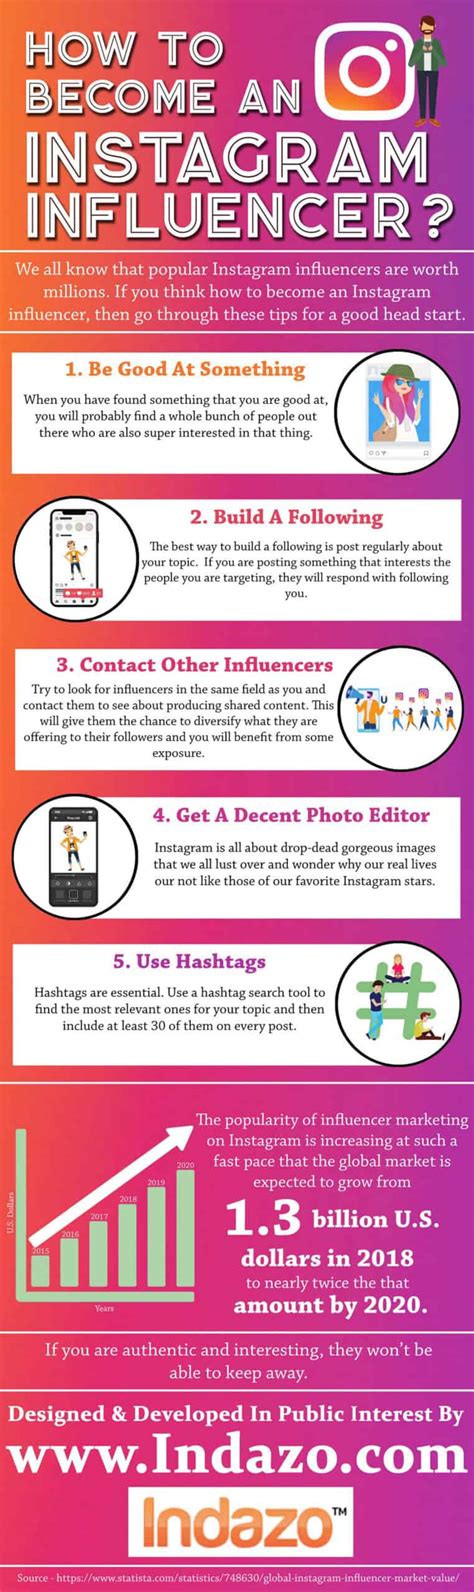 How to become an instagram influencer. Are you looking for ways to get more followers on Instagram? If so, you’ve come to the right place. With a few simple tips, you can get 1K free Instagram followers instantly. Here ... 